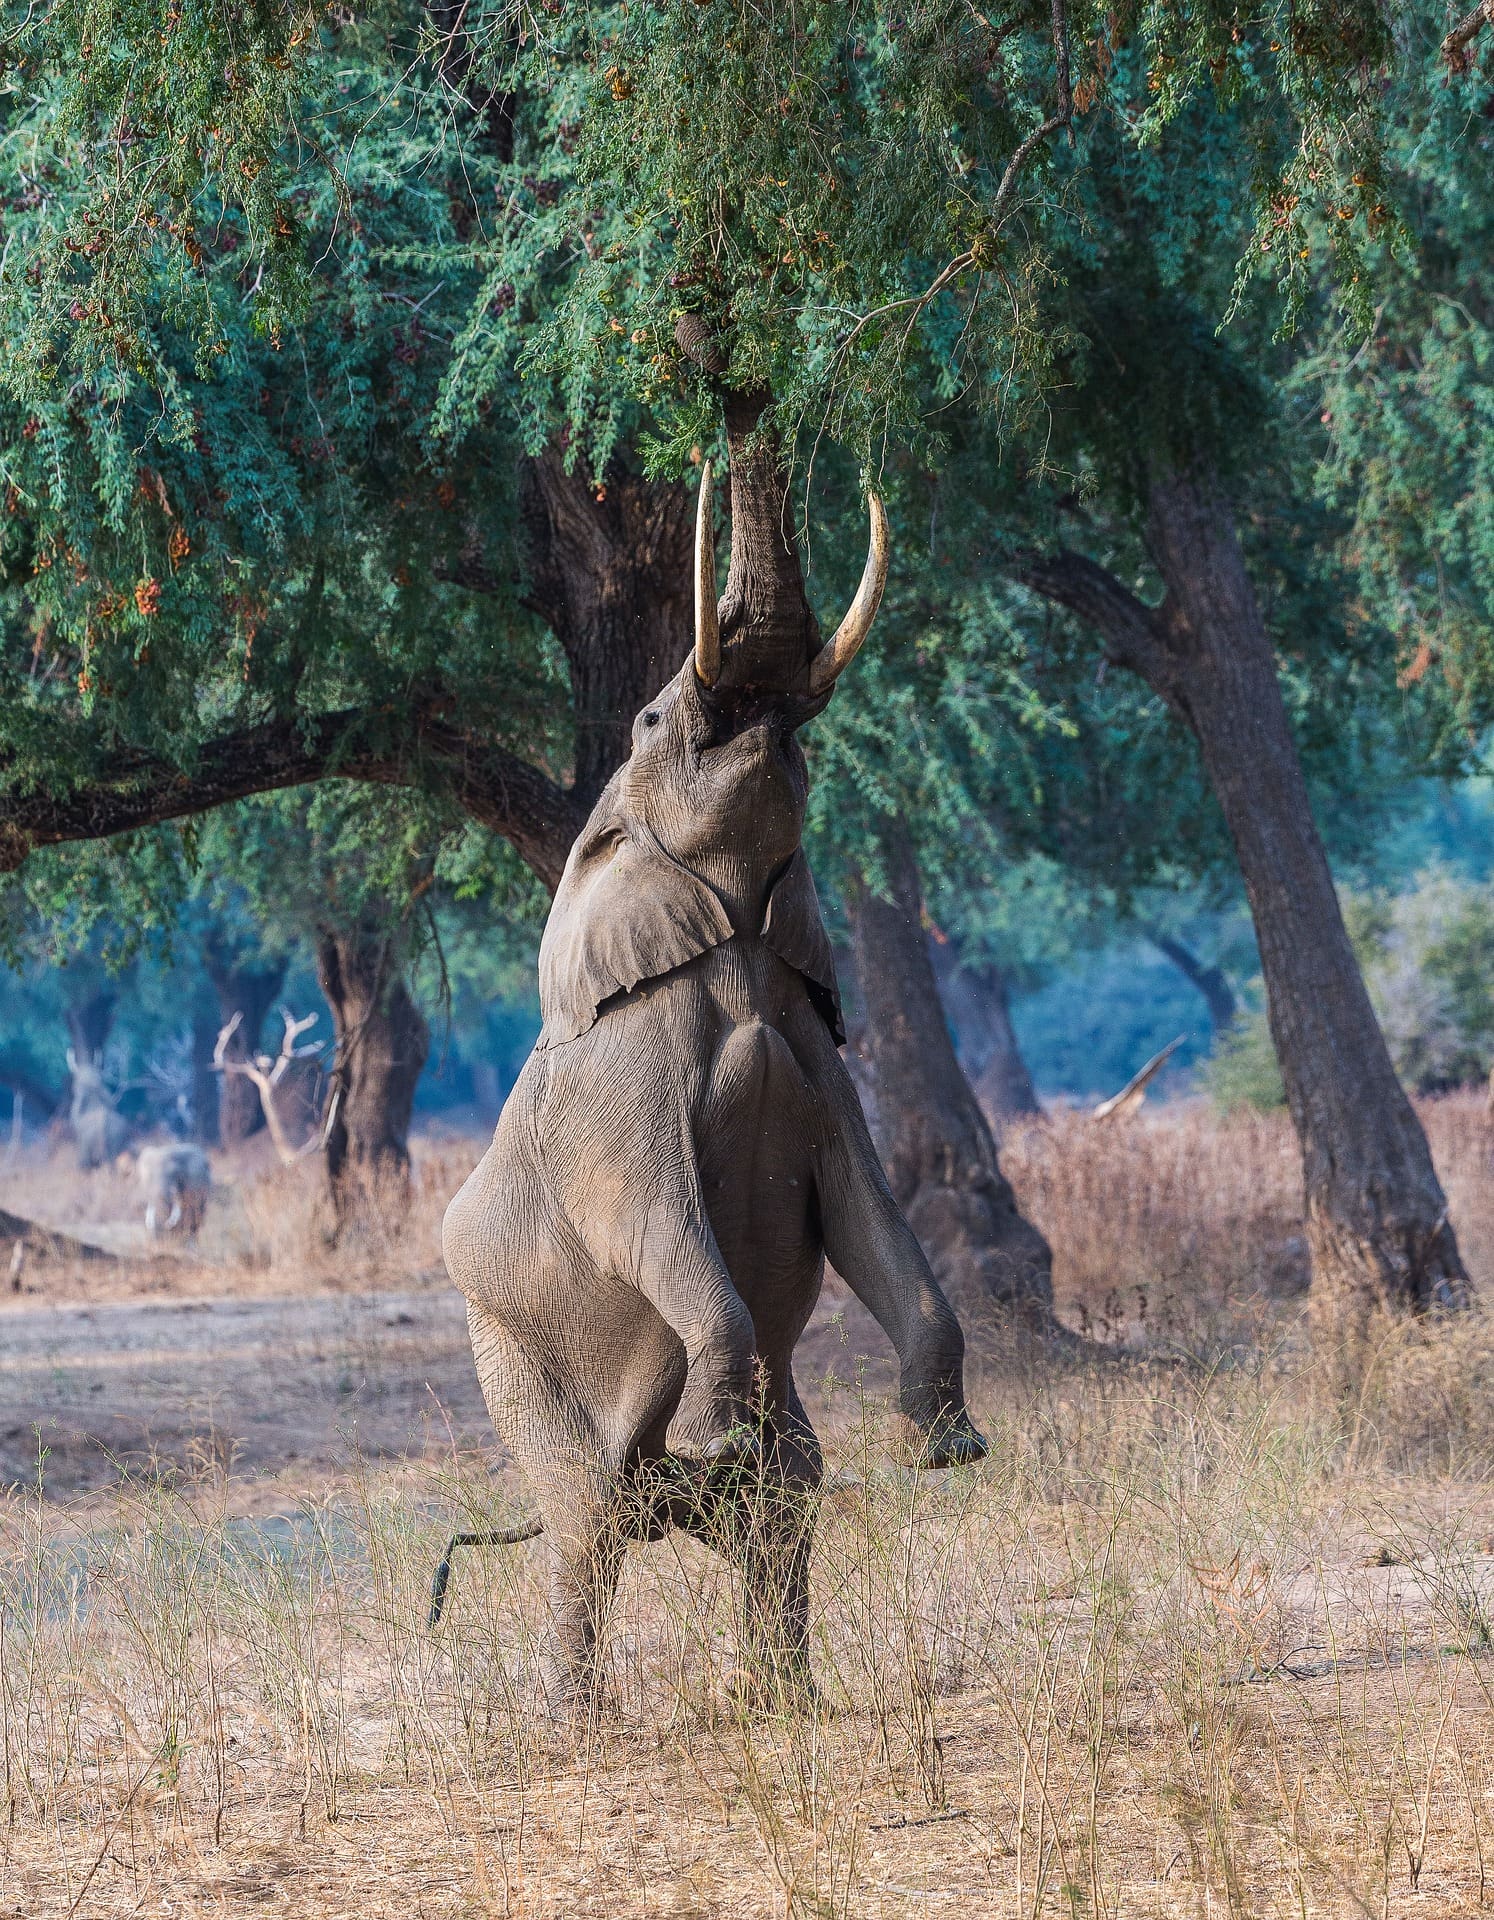 Elephant reaching for fruit high in a tree, Mana Pools National Park - 14 Spectacular National Parks In Africa